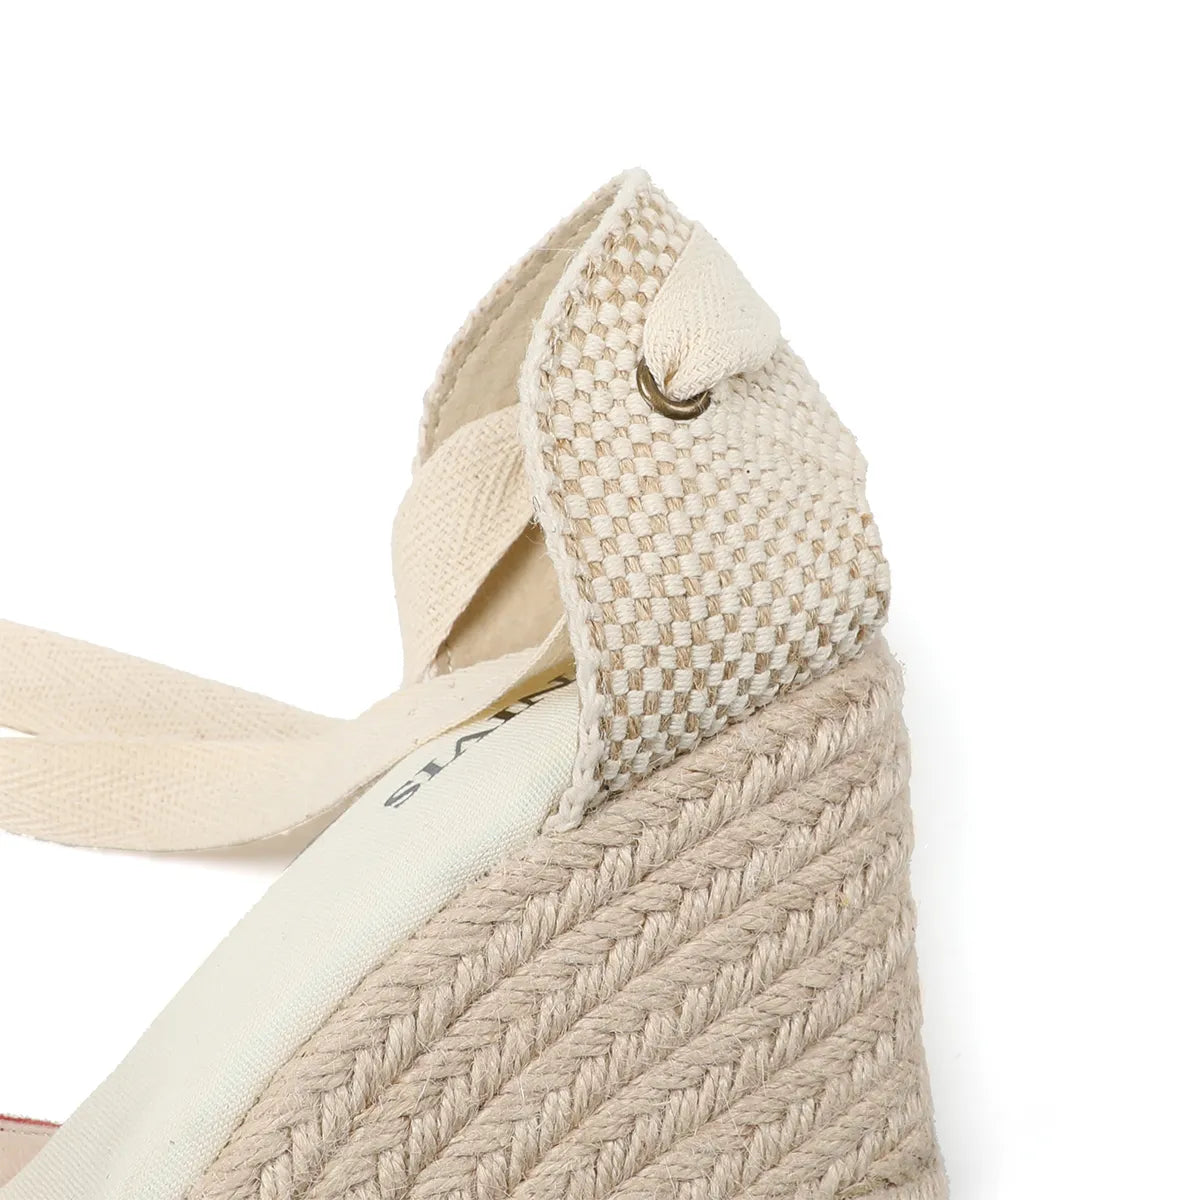 🍄Womens Wedges Espadrille Summer Shoes